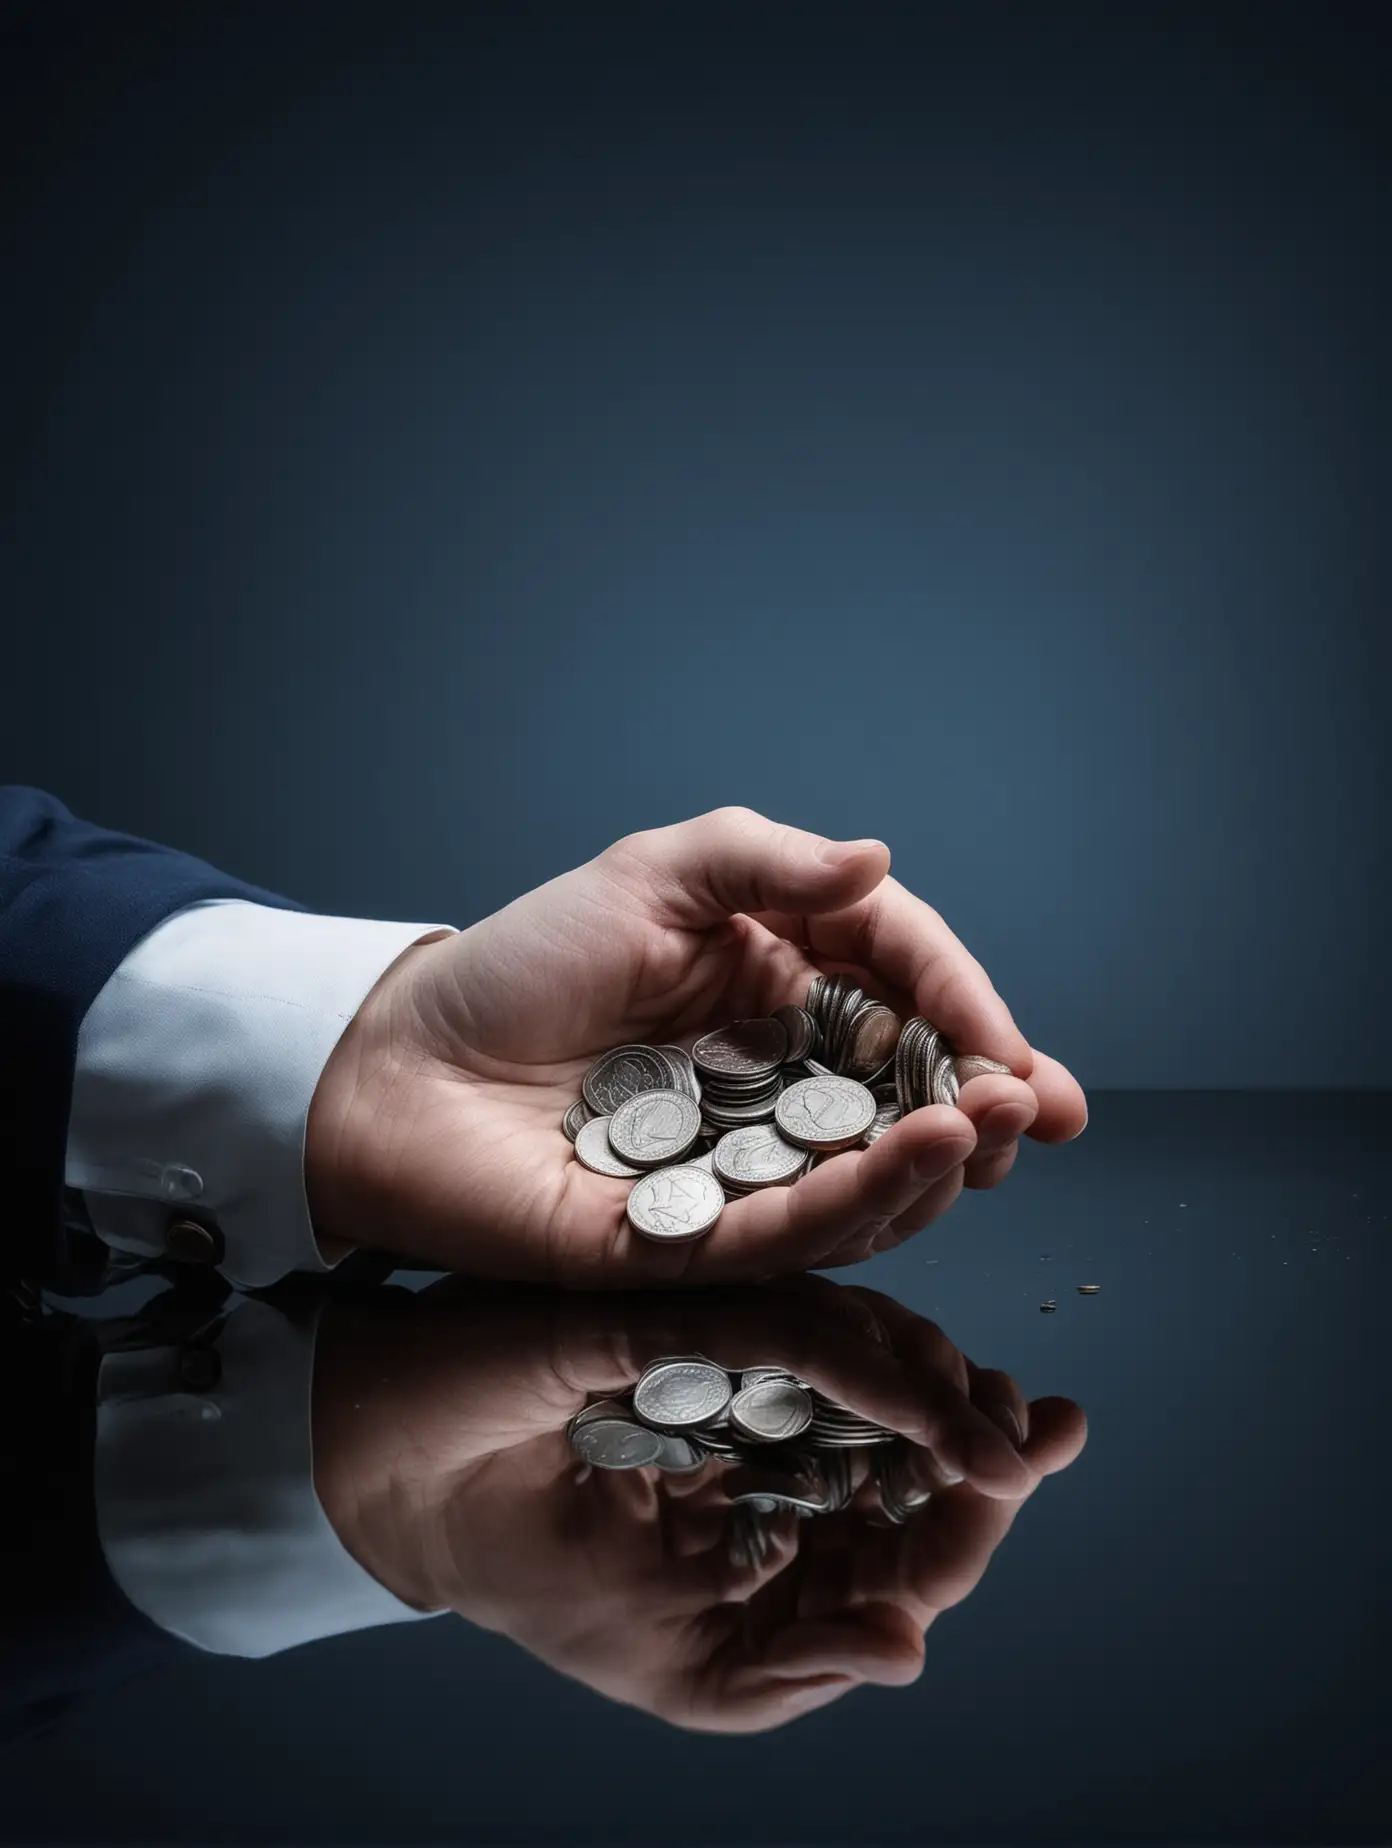 dark blue theme. Professional photo with reflection showing a hand with coins
